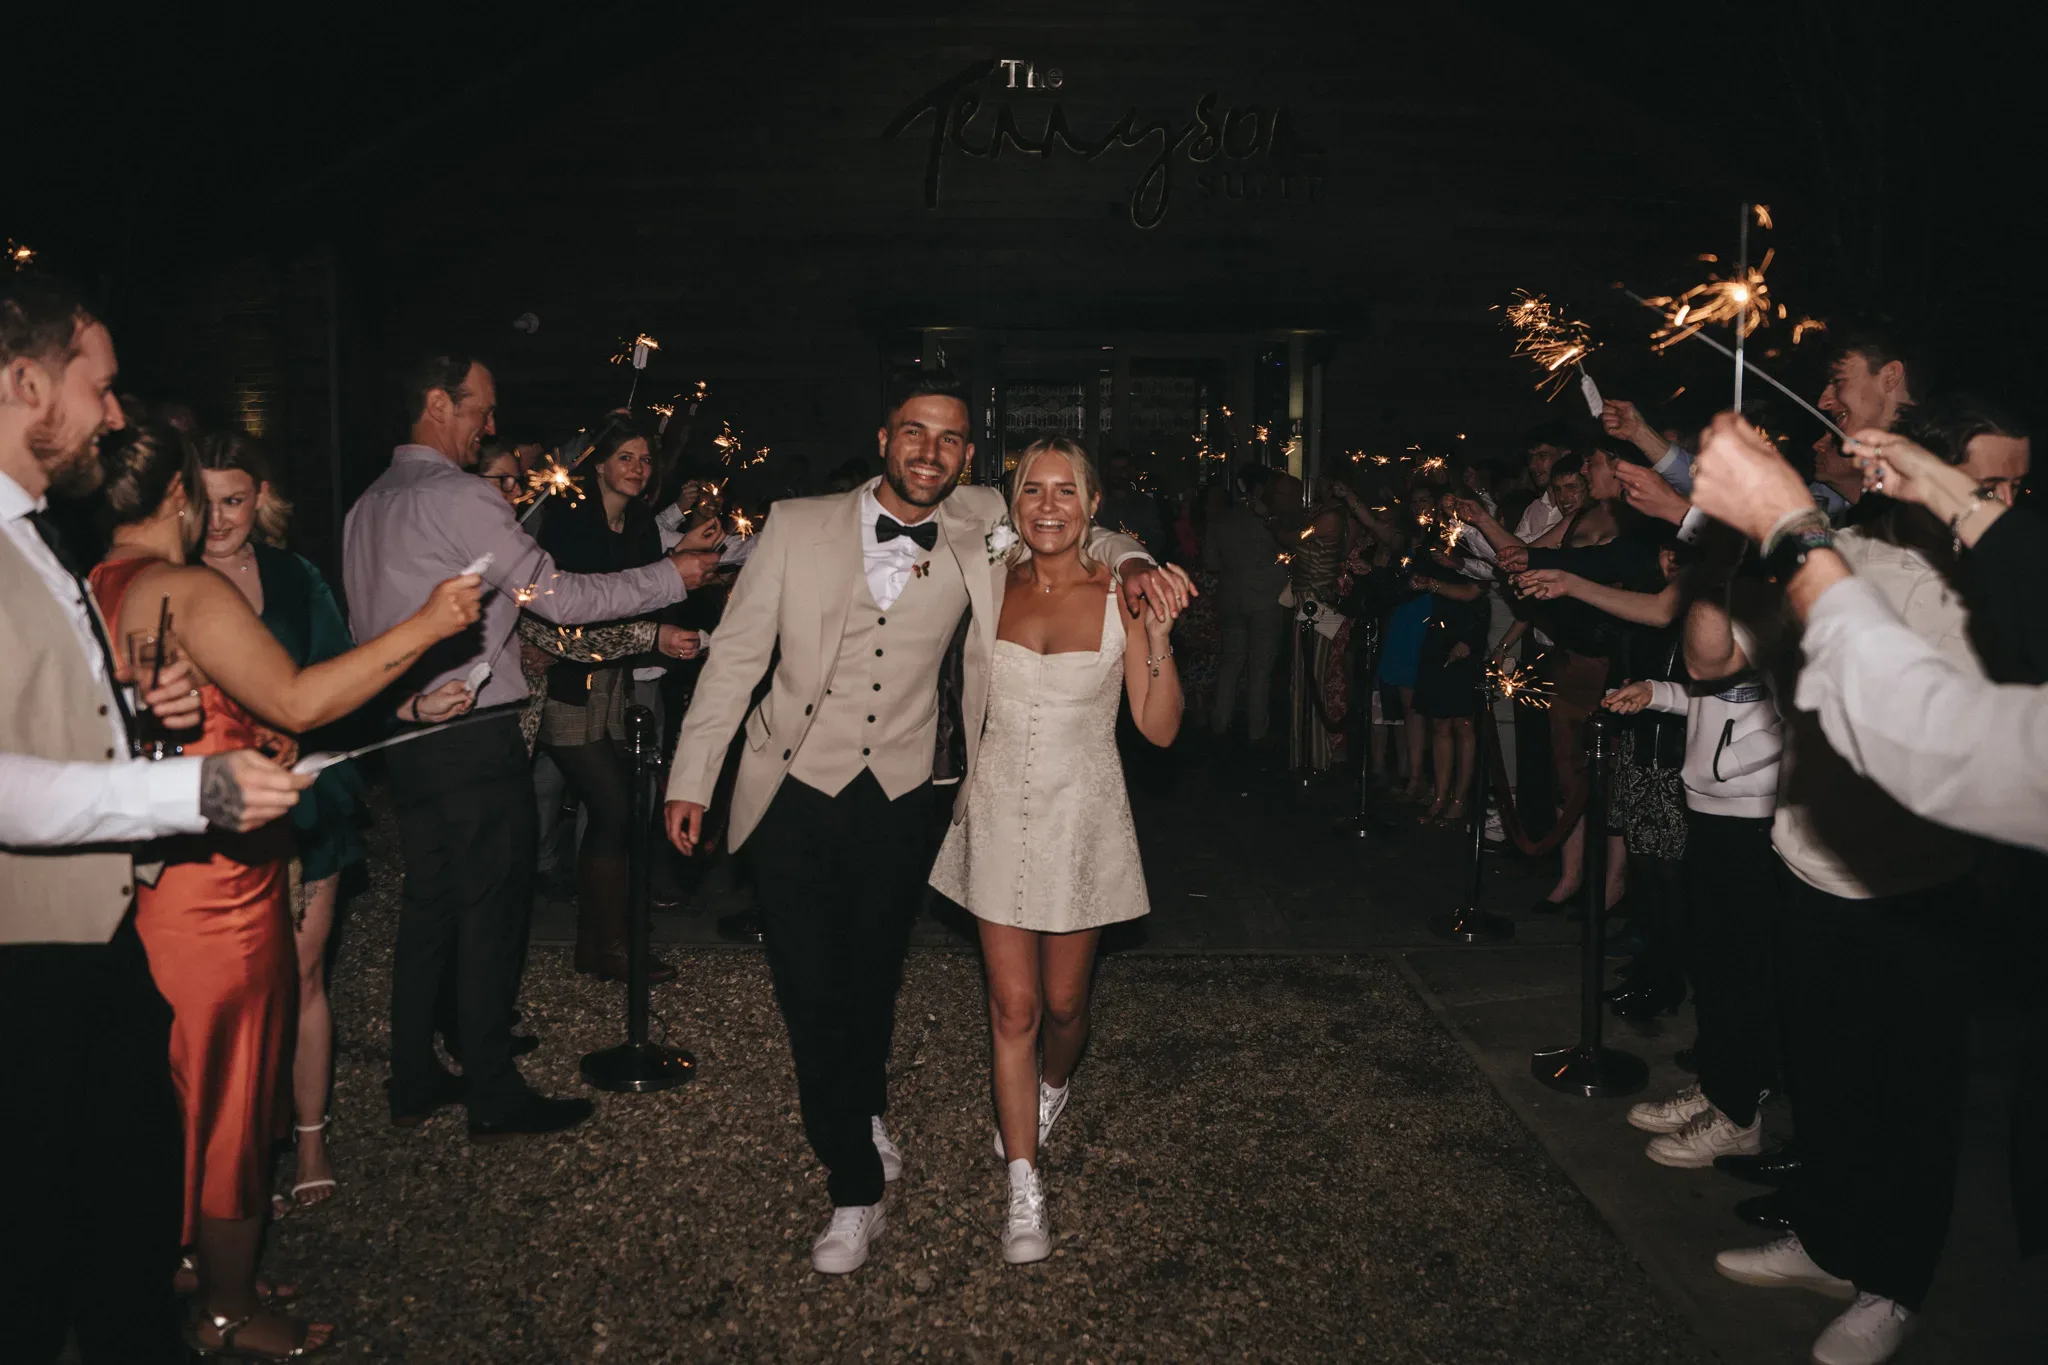 A newlywed couple walks through a sparkler send-off at night, smiling joyously. the bride, in a short white dress, and the groom, in a cream suit, hold hands under a dimly lit wooden venue with guests around them holding sparklers.